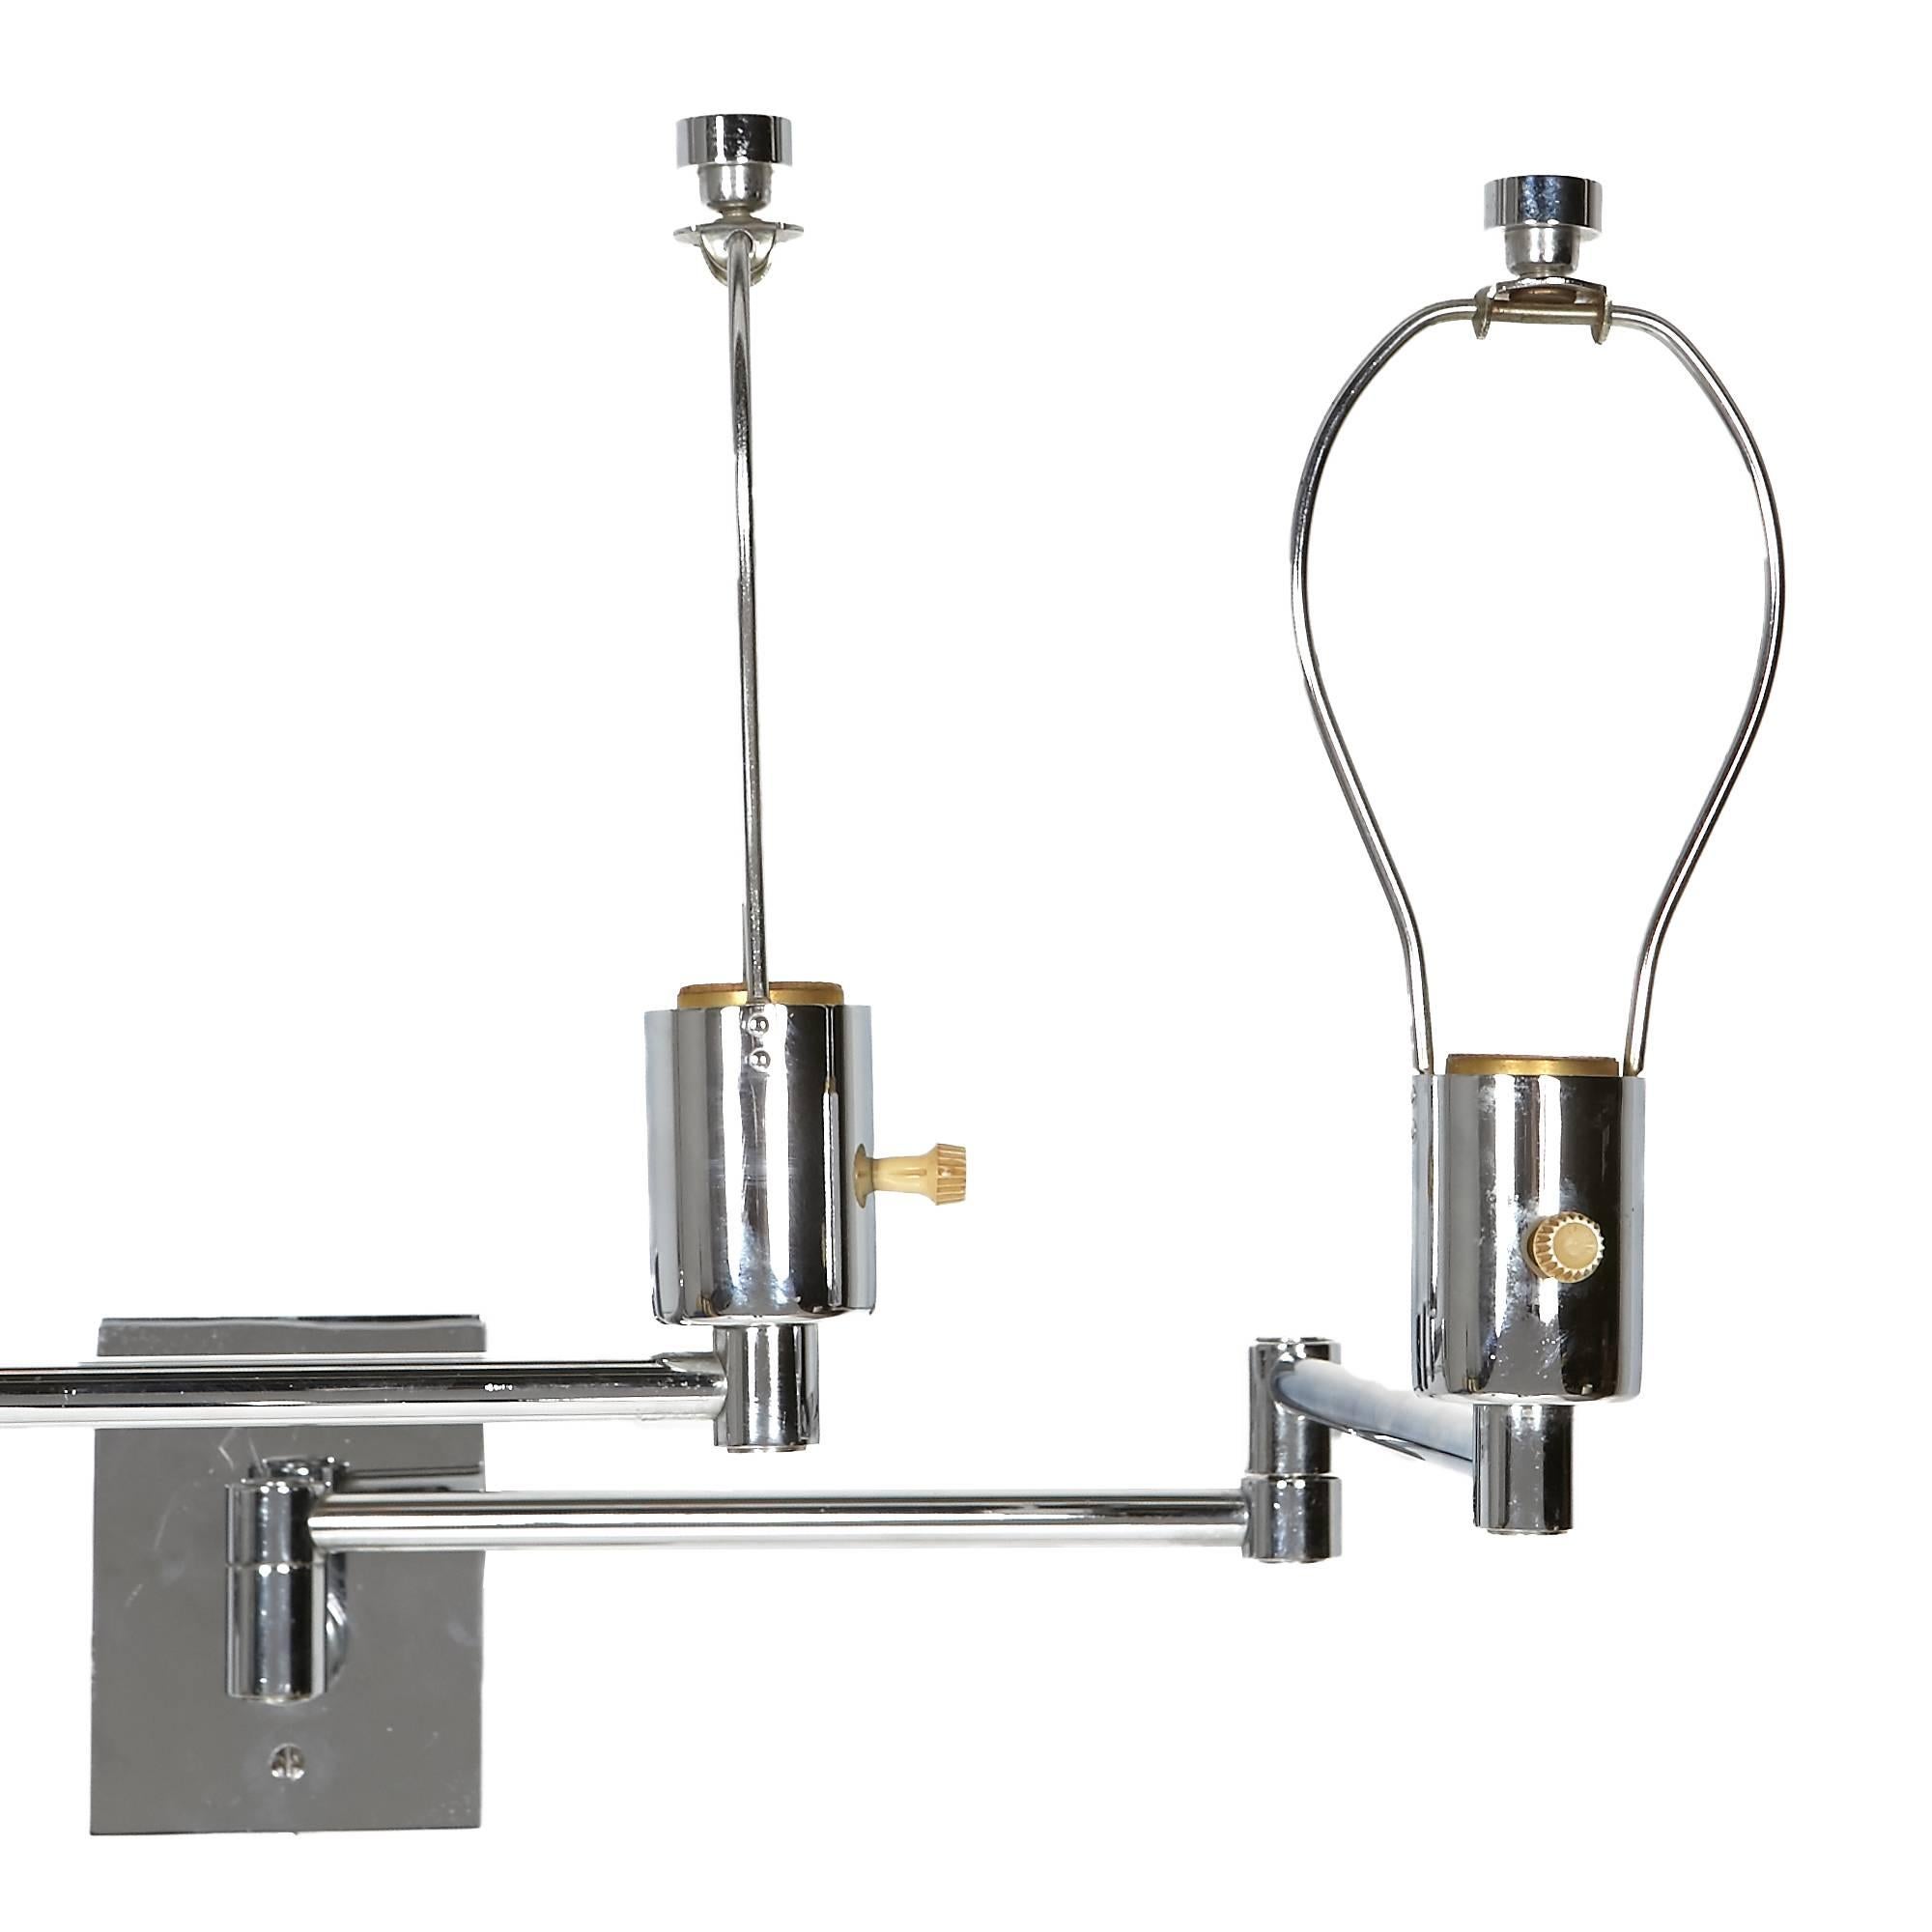 Pair of chrome wall mounted swing arm lamps designed by Georg W. Hansen. Chrome wall mount plate is 3.5"L x .5"W x 4.5"H and has the original finials. Uses a standard bulb up to 100W. Does not include column cord covers, but can be